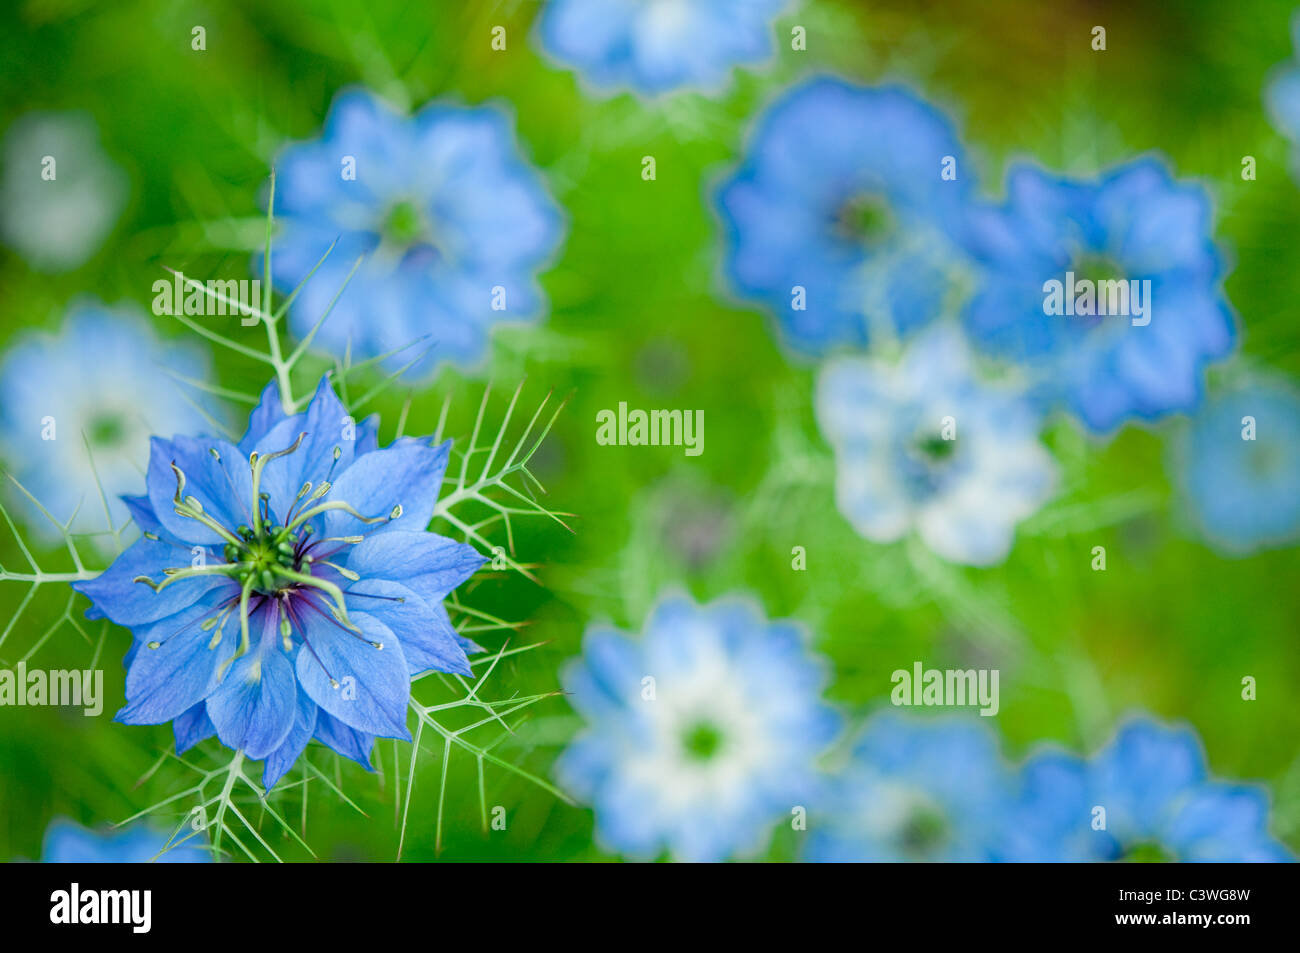 Nigella damascena or Love in a Mist - bright blue flowers, with soft focus semi-abstract background. Stock Photo